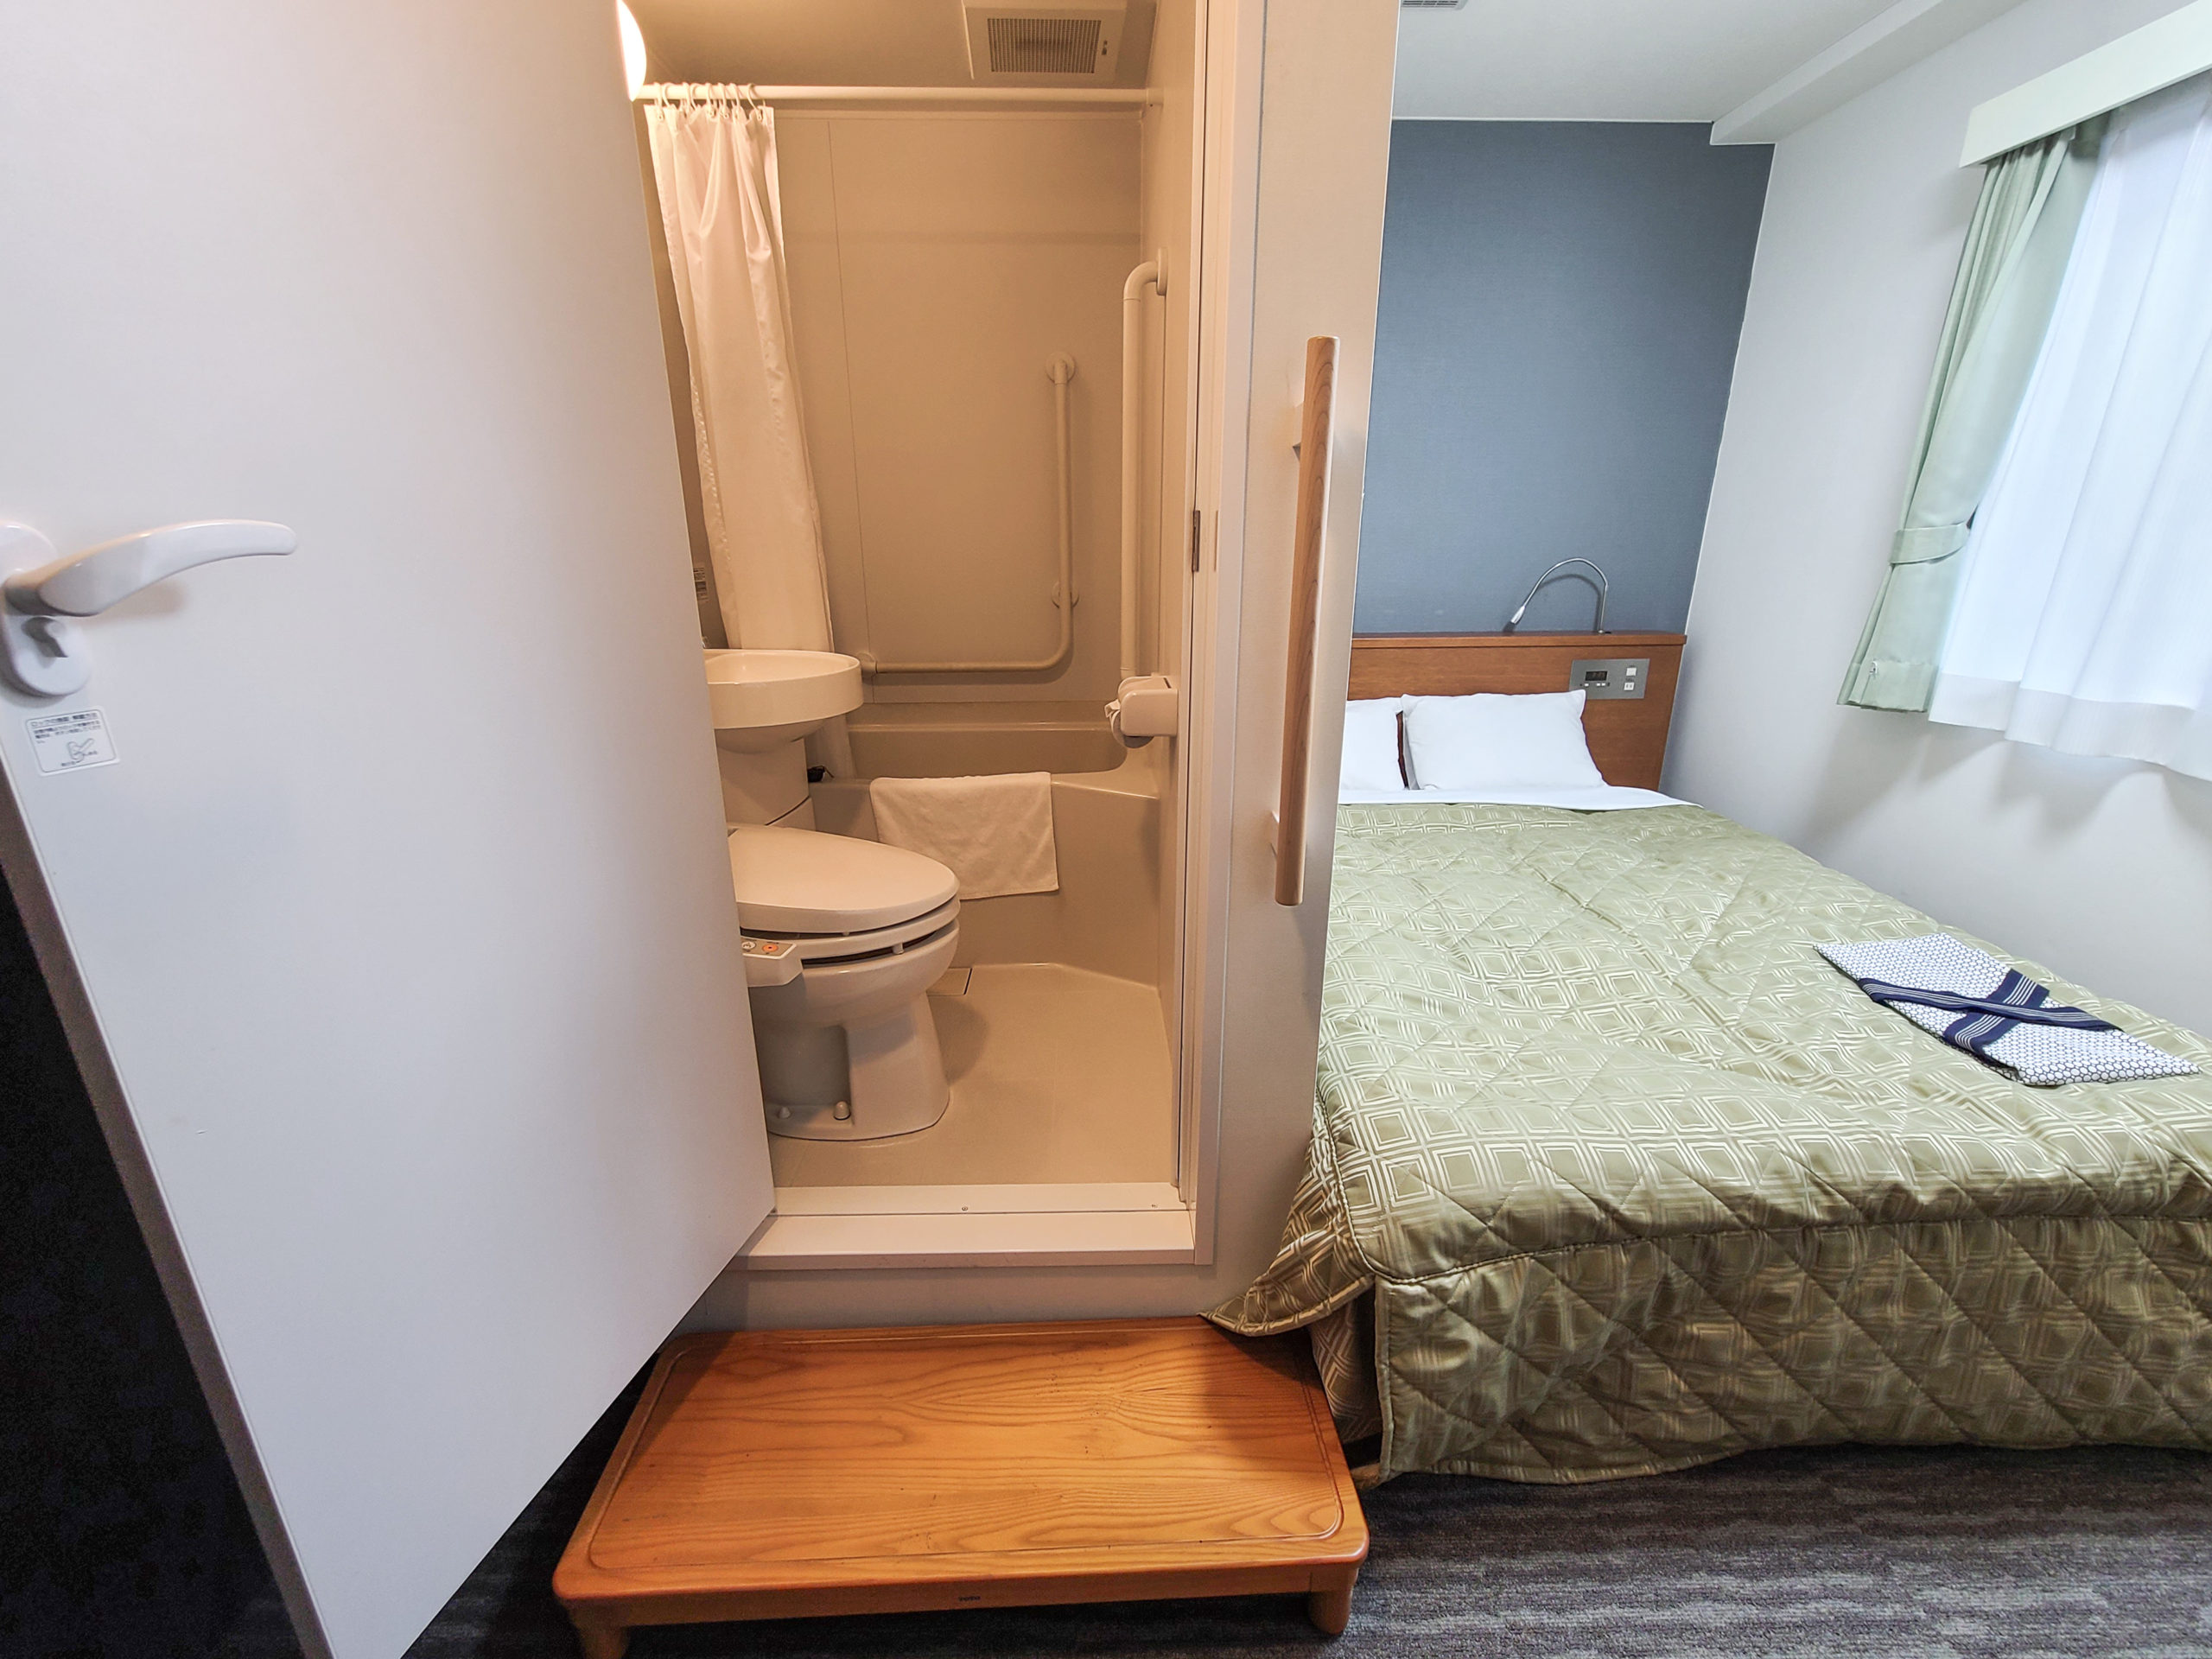 This room has a handrail and stepping stool to make access to the raised unit bath easier